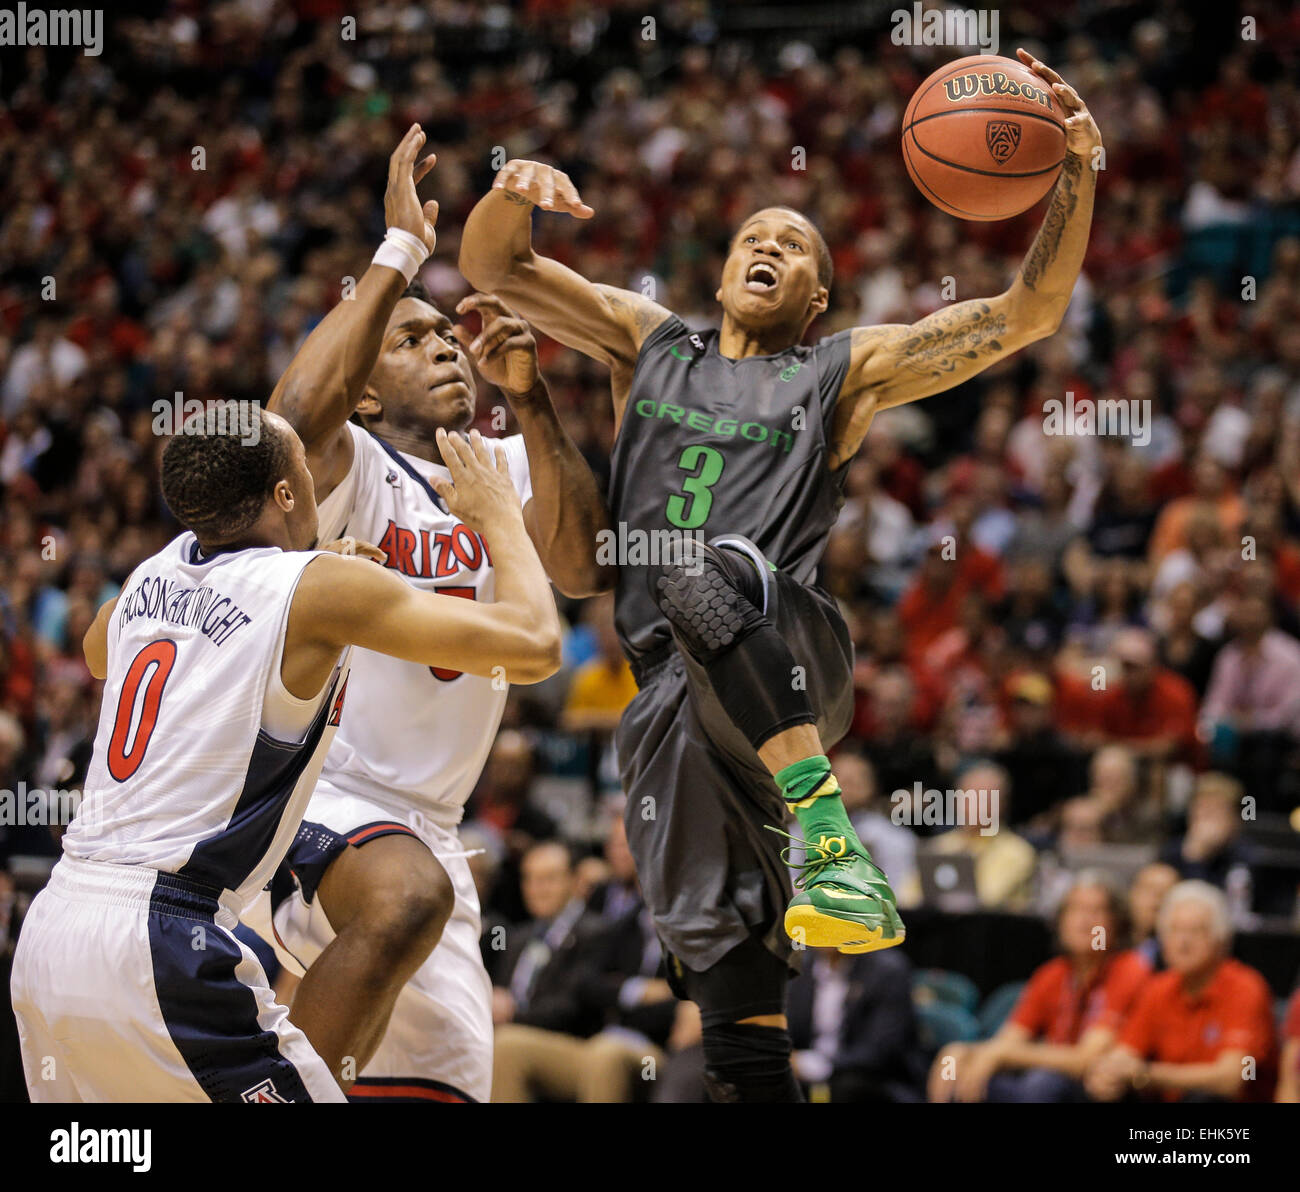 Las Vegas, NV, USA. 14th Mar, 2015. Oregon G # 3 Joseph Young tries to take the baseline tries to slam dunk over Arizona # 5 Stanley Johnson and # ) Parker Jackson-Cartwright during NCAA Pac 12 Men's Basketball Tournament between Arizona Wildcats and Oregon Ducks 52-80 lost at MGM Grand Garden Arena Las Vegas, NV. Credit:  csm/Alamy Live News Stock Photo